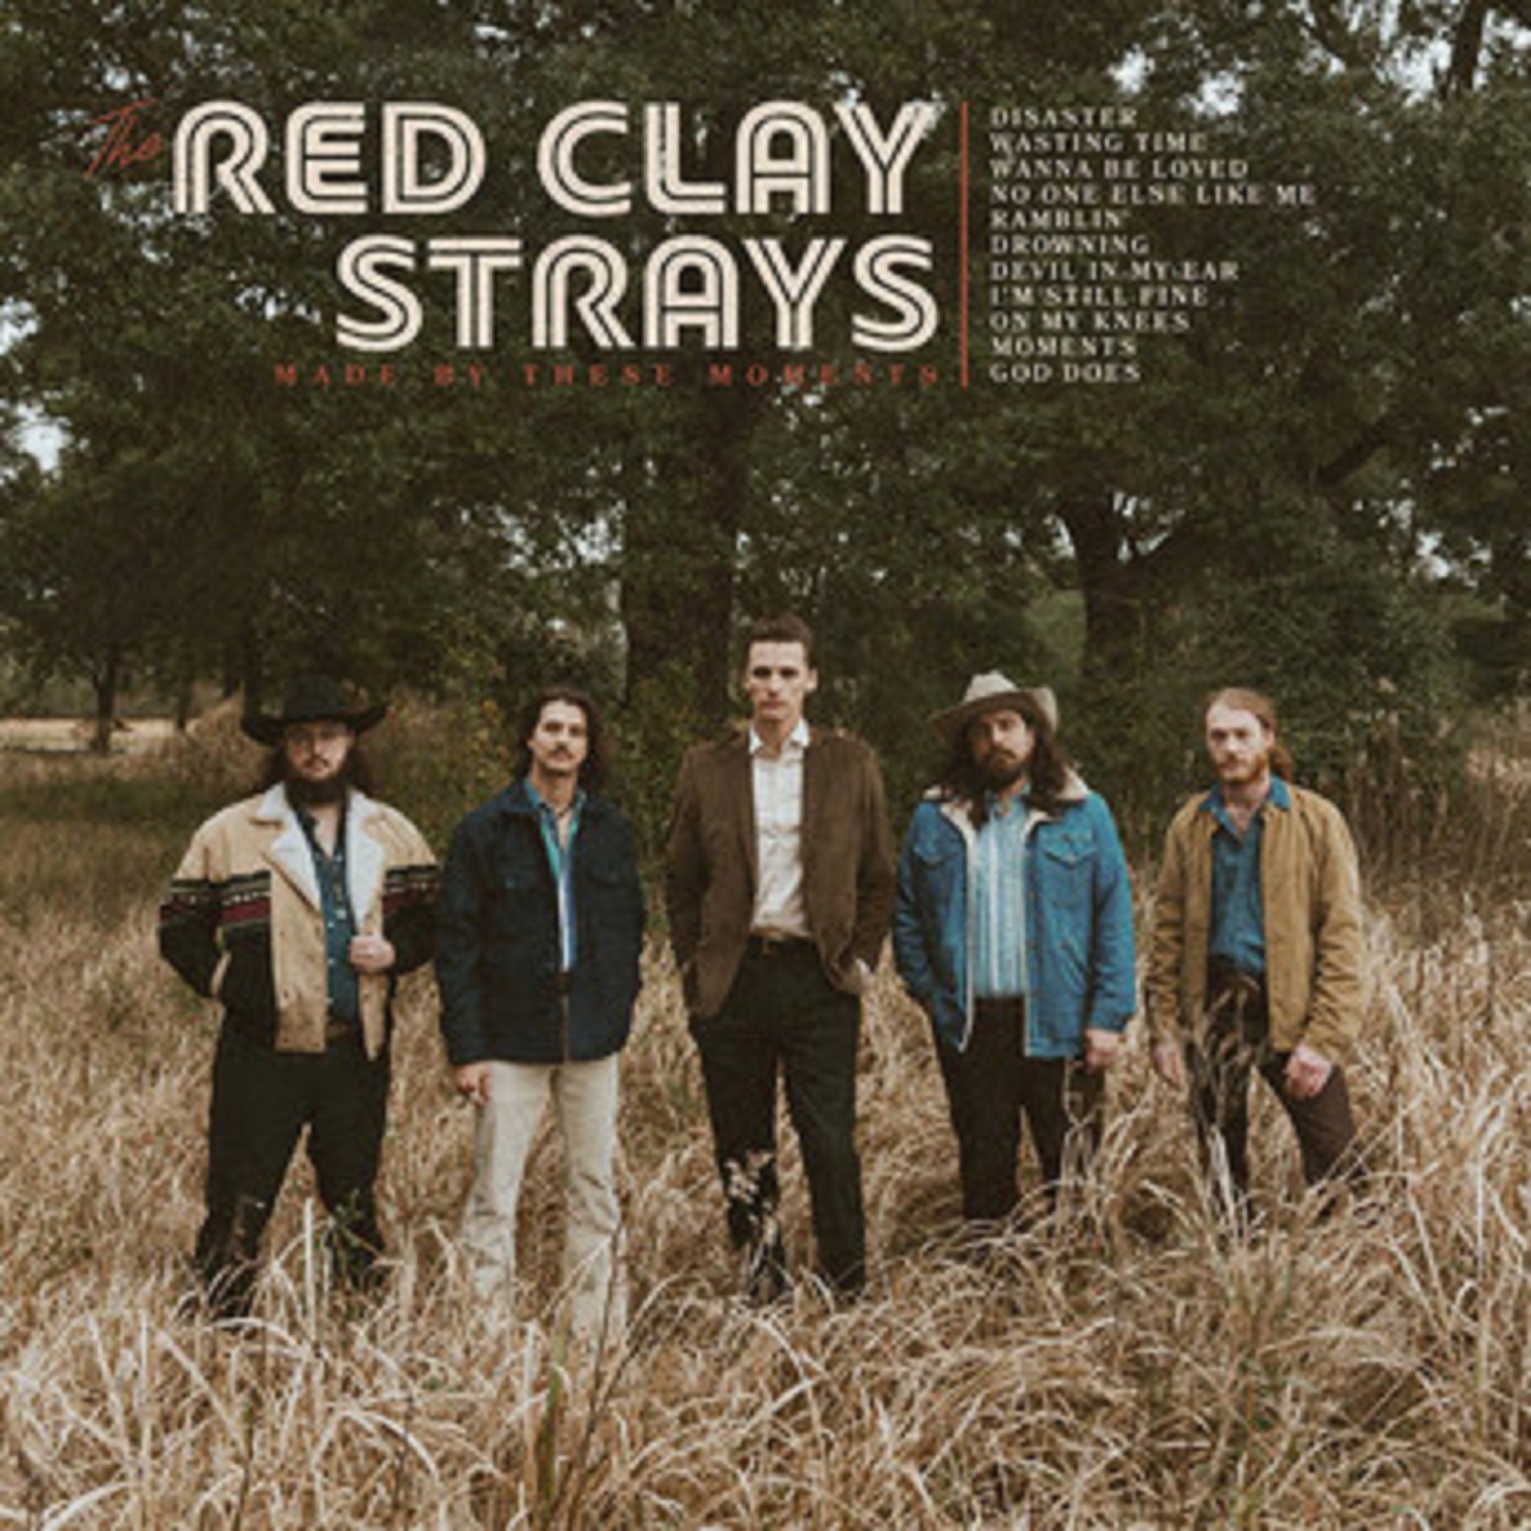 The Red Clay Strays’ "Made by These Moments" out July 26 on RCA Records, first single “Wanna Be Loved” out today